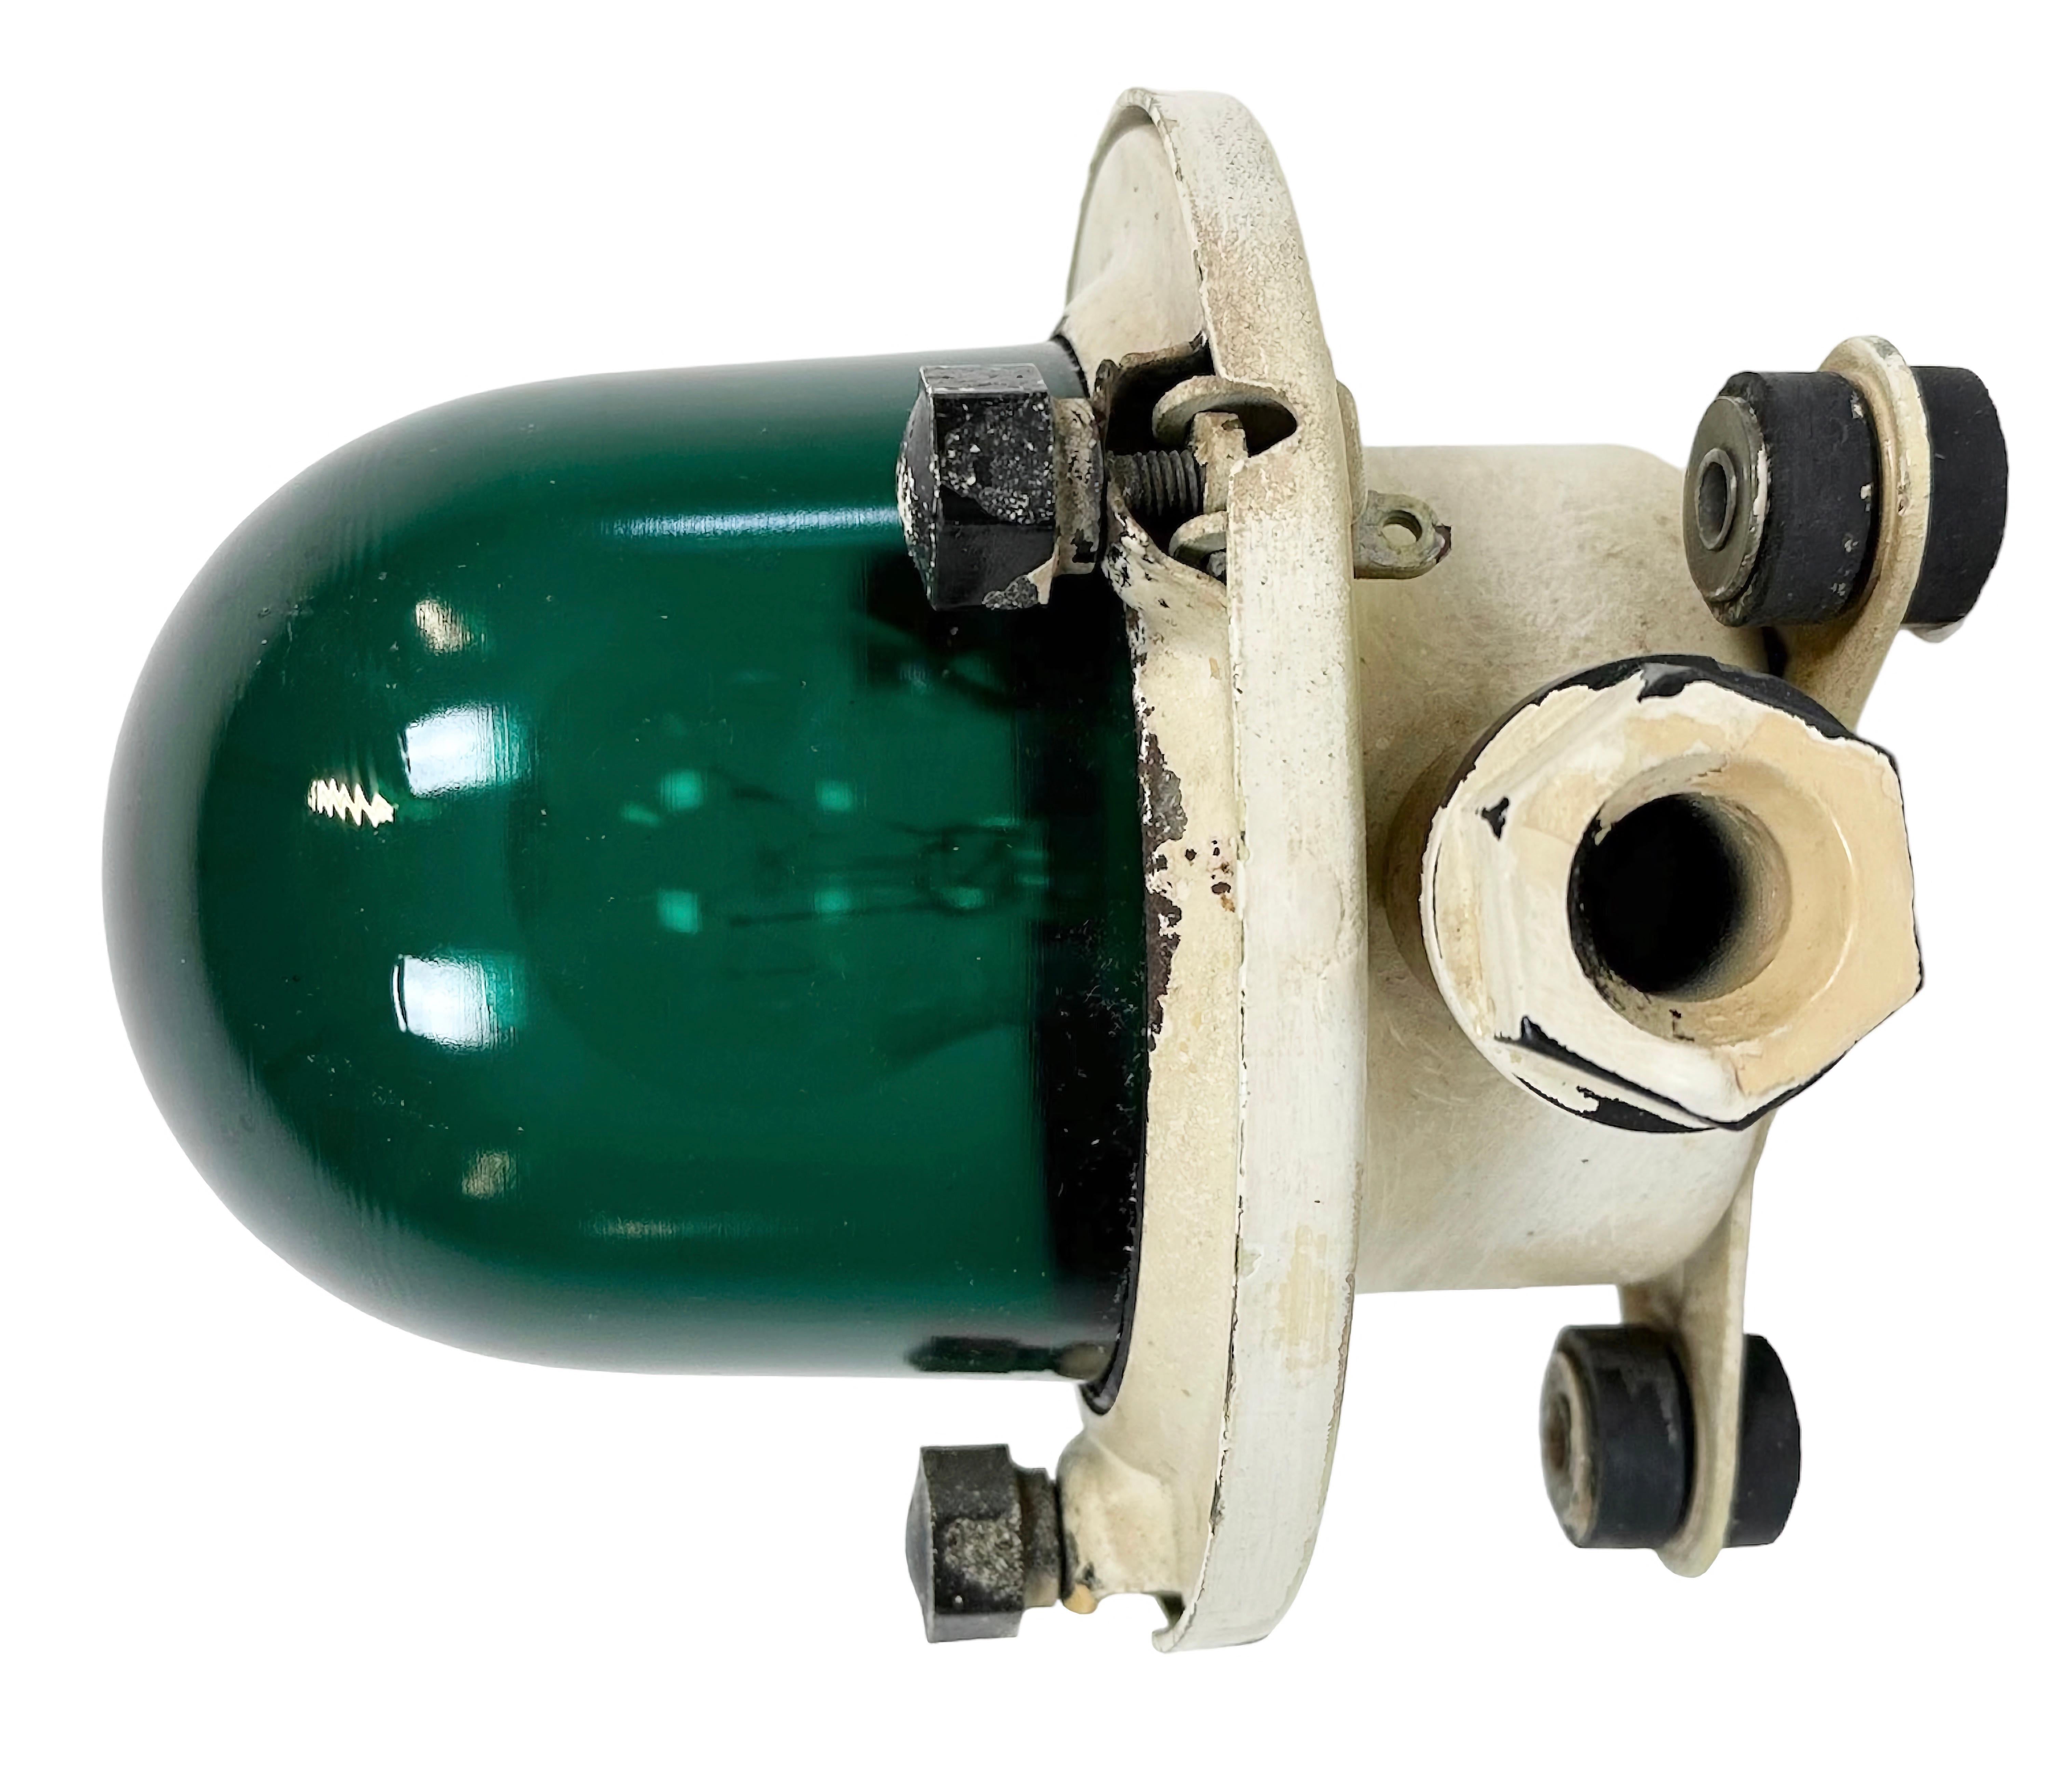 Vintage industrial celing or wall light made in former Soviet Union during the 1960s. It features a beige metal body and a green glass cover. The socket requires E 27/ E 26 light bulbs. New wire. The diameter of the lamp is 17cm. The weight of the